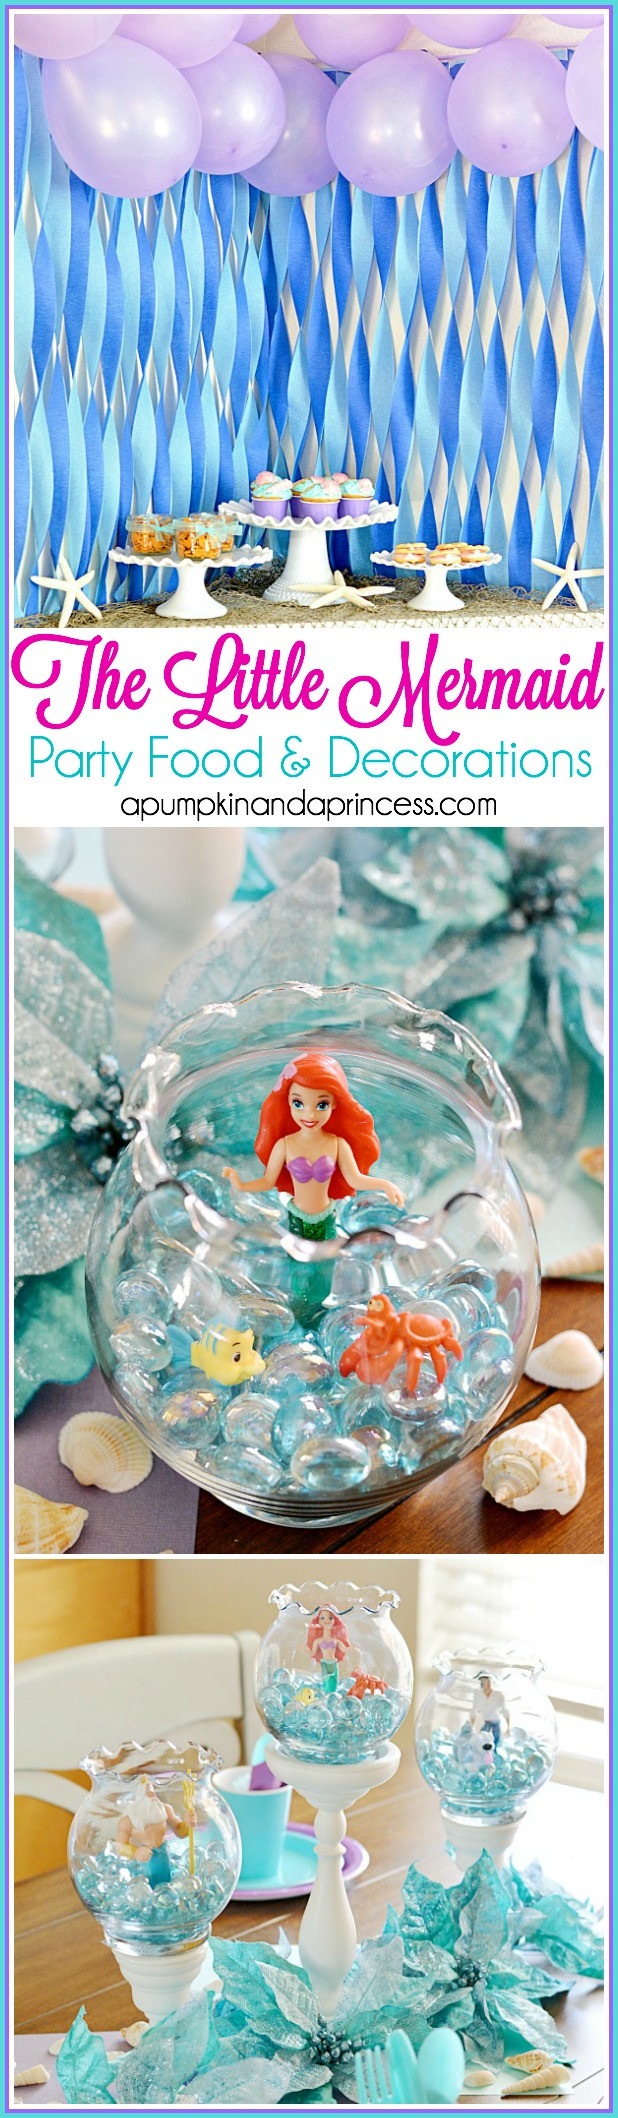 Little Mermaid Birthday Party Decoration Ideas
 The Little Mermaid Party A Pumpkin And A Princess